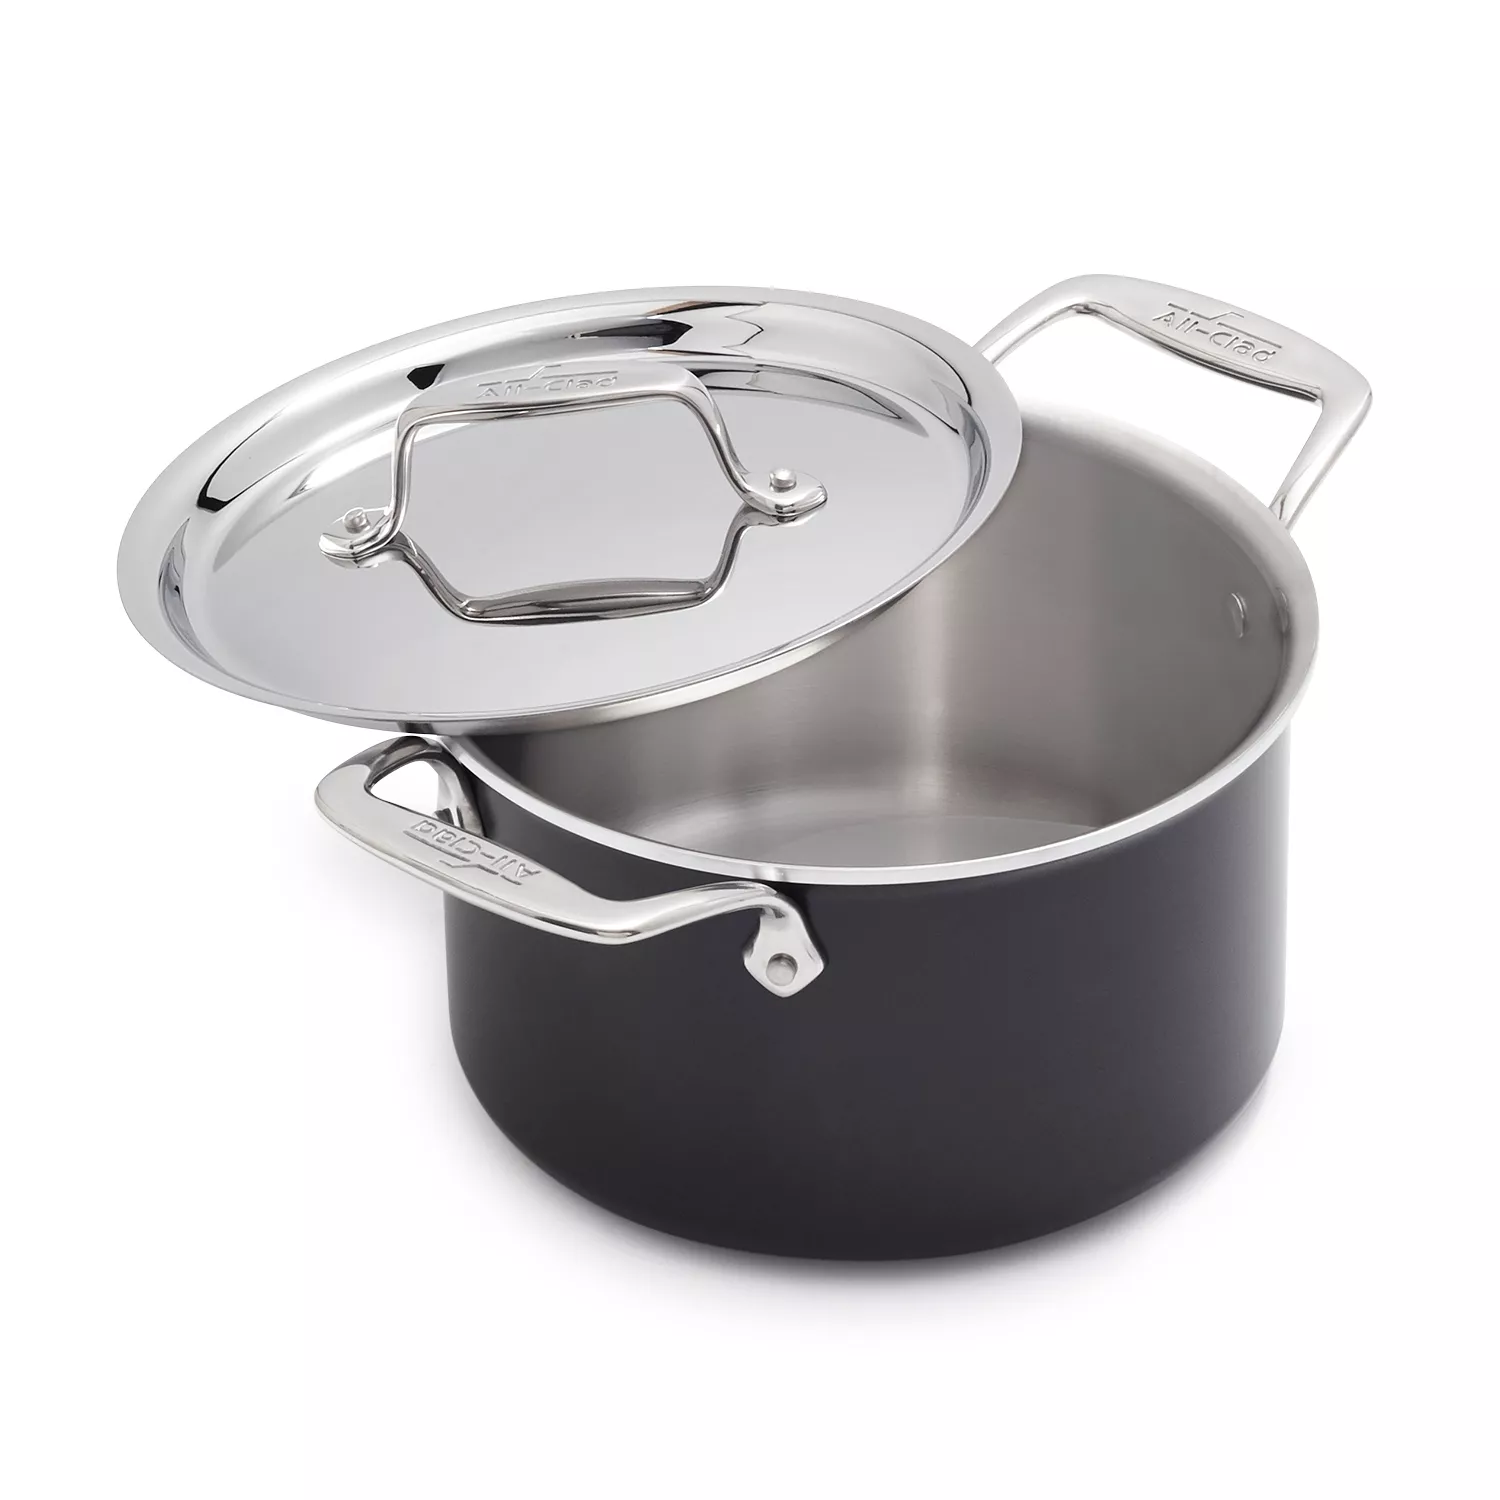 All-clad LTD 8 Quart Stock Pot With Lid, Stainless Steel With Hard